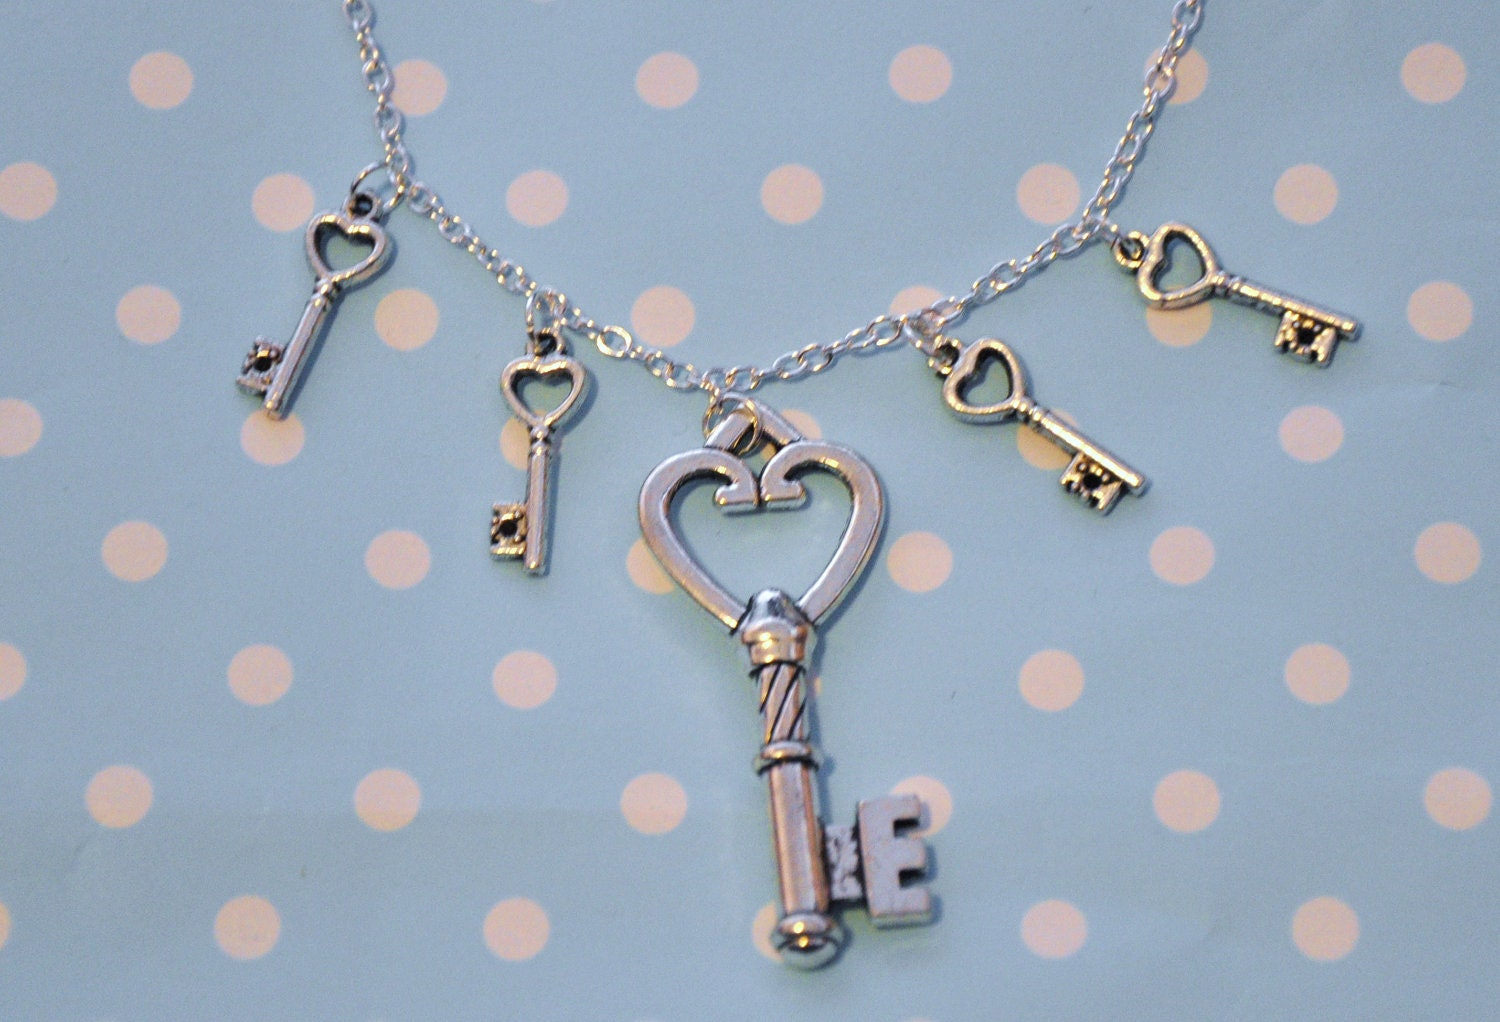 Key Charm Necklace - Cute, Pretty Silver Plated Jewelry - Four little keys surround one large key charm - Quirky, Fun Jewellery